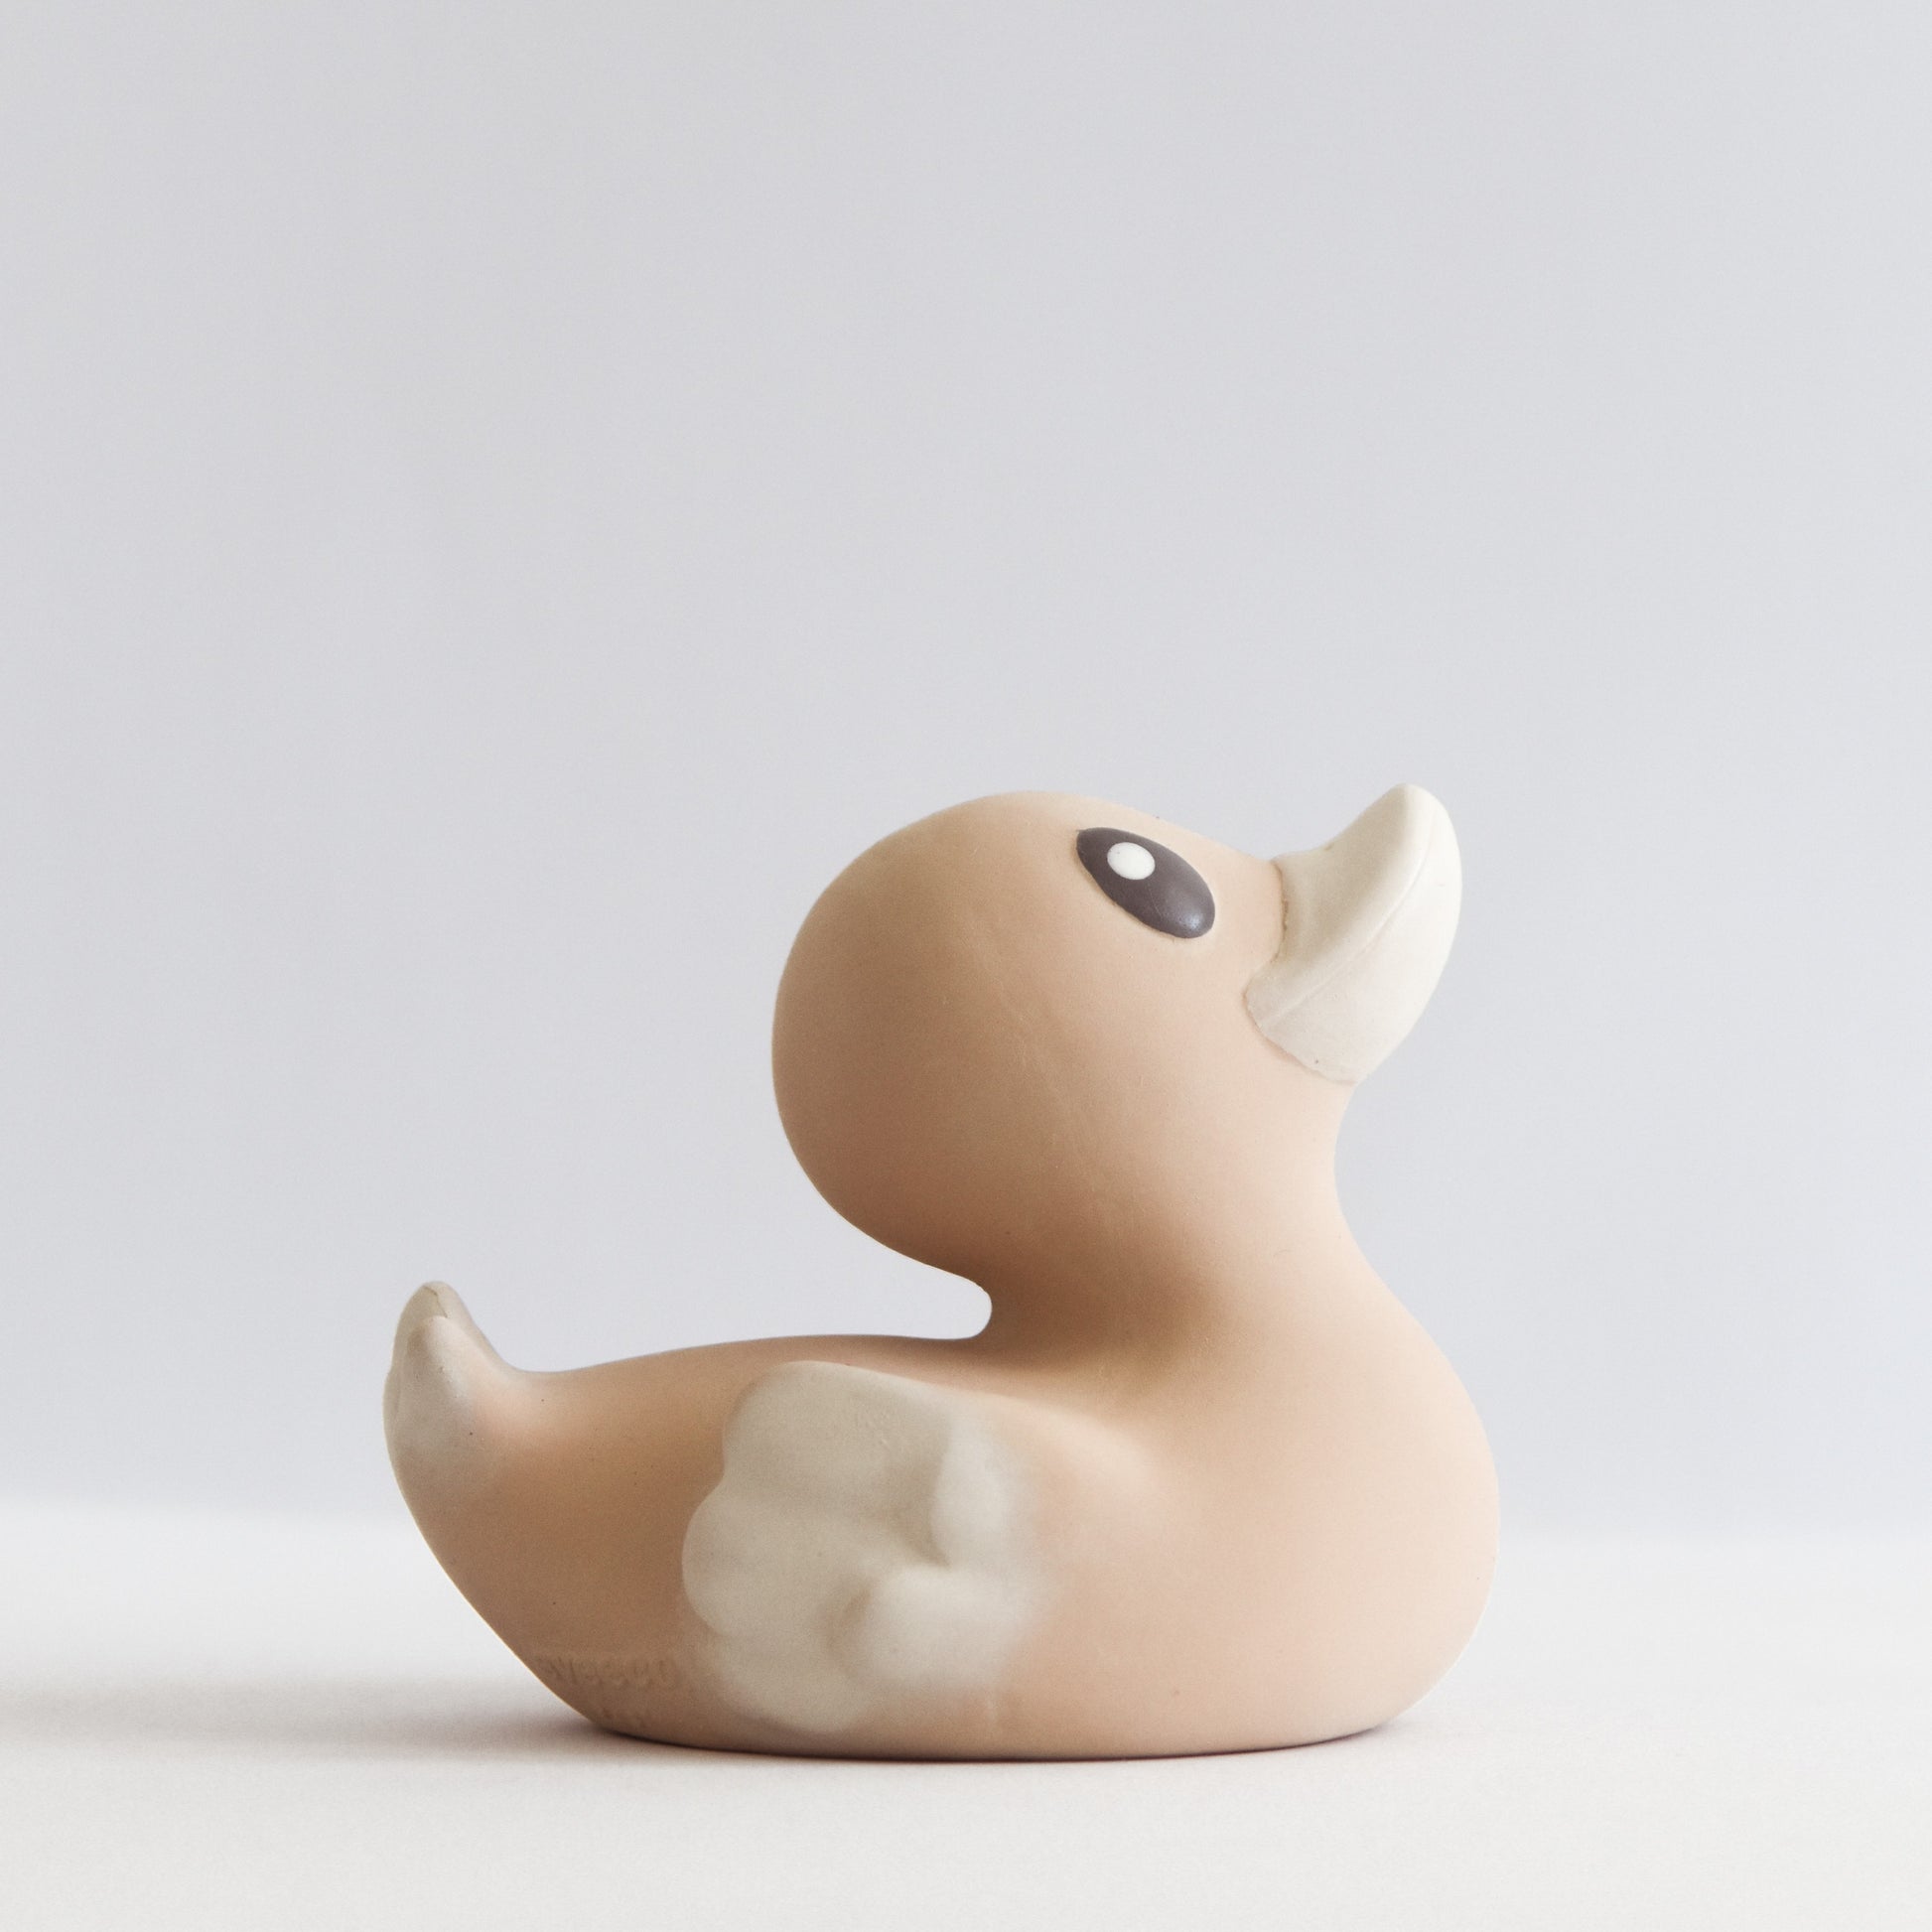 side view of an adorable natural rubber bath toy duck in a light brown peach colour